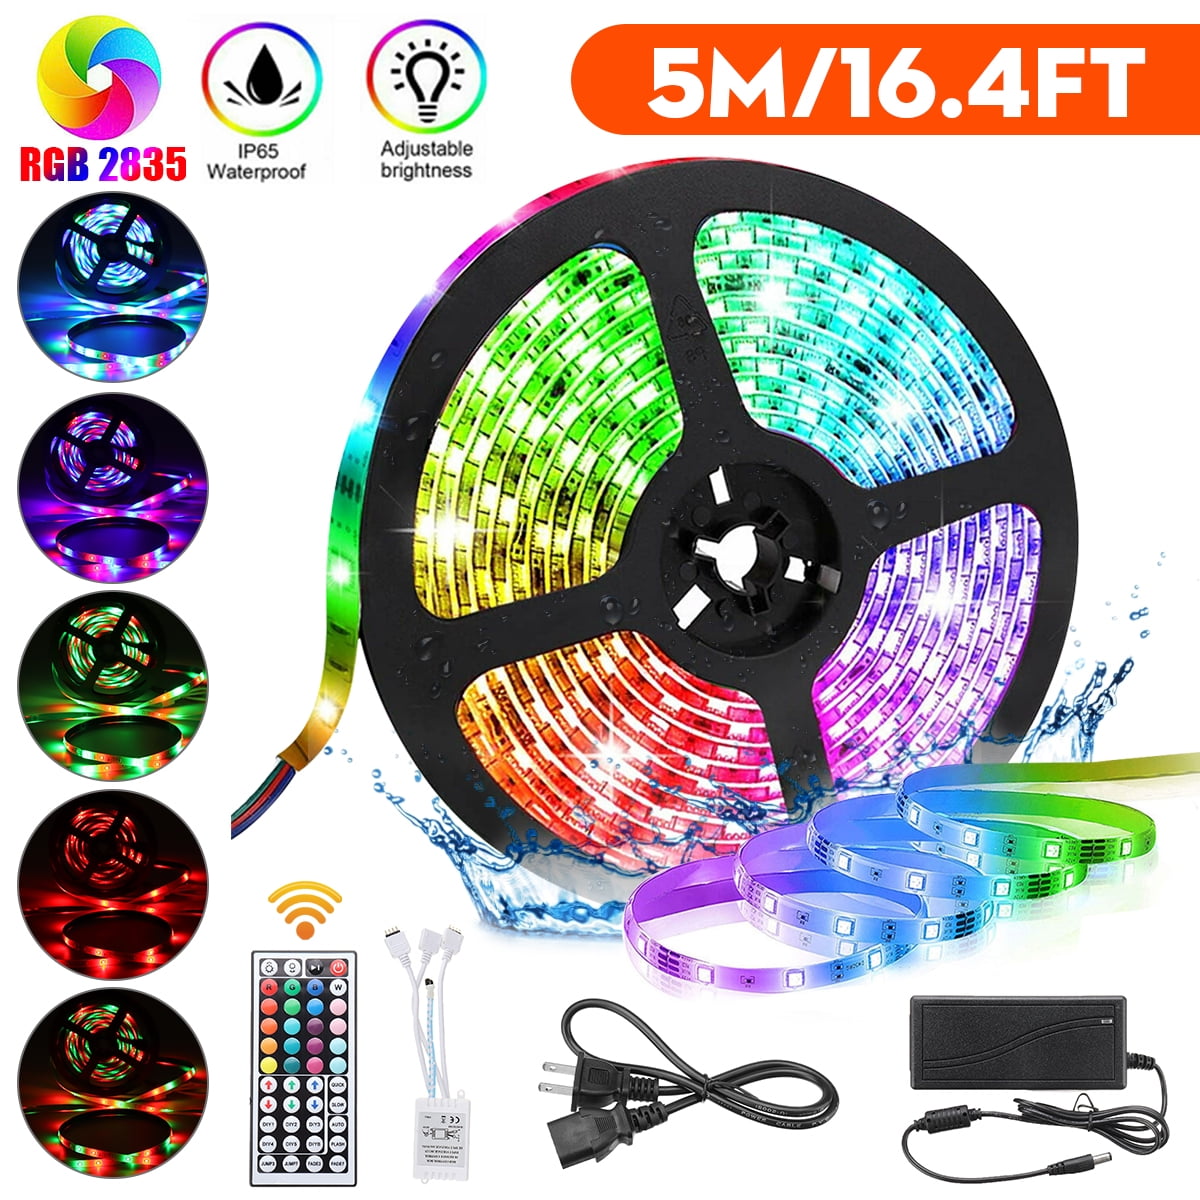 MAX 64FT Flexible Strip Light RGB LED SMD Remote Fairy Lights Room Party Bar TV# 